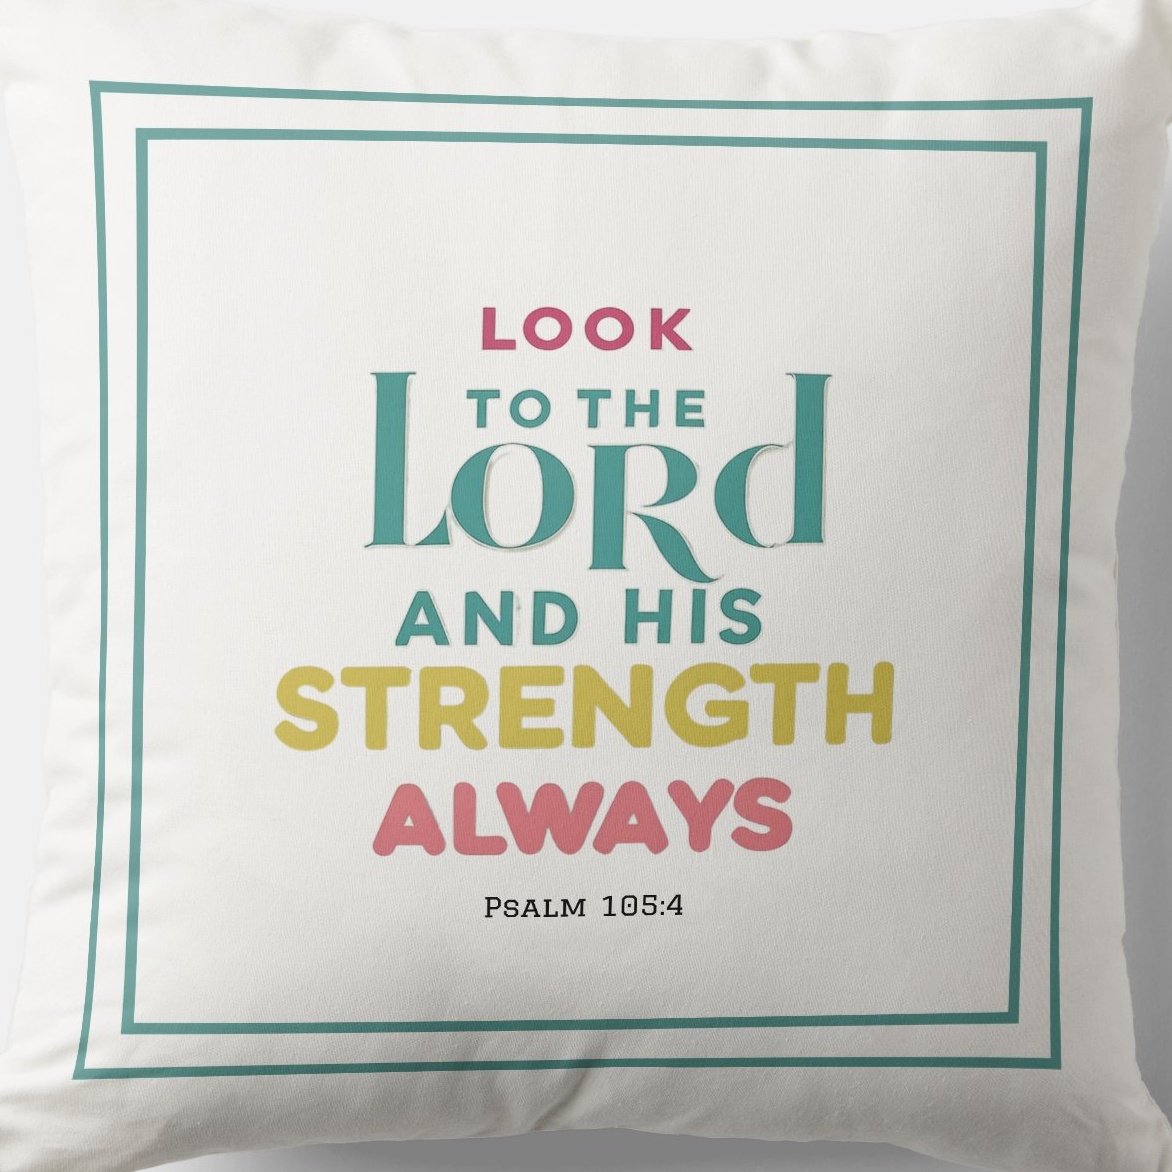 Look To The Lord Always #Cushion Verse zazzle.com/look_to_the_lo… #Pillow #Blessing #JesusChrist #JesusSaves #Jesus #christian #spiritual #Homedecoration #uniquegift #giftideas #giftforhim #giftidea #HolySpirit #pillows #giftshop #giftsforher #giftsforfriend #faith #hope #bibleverse